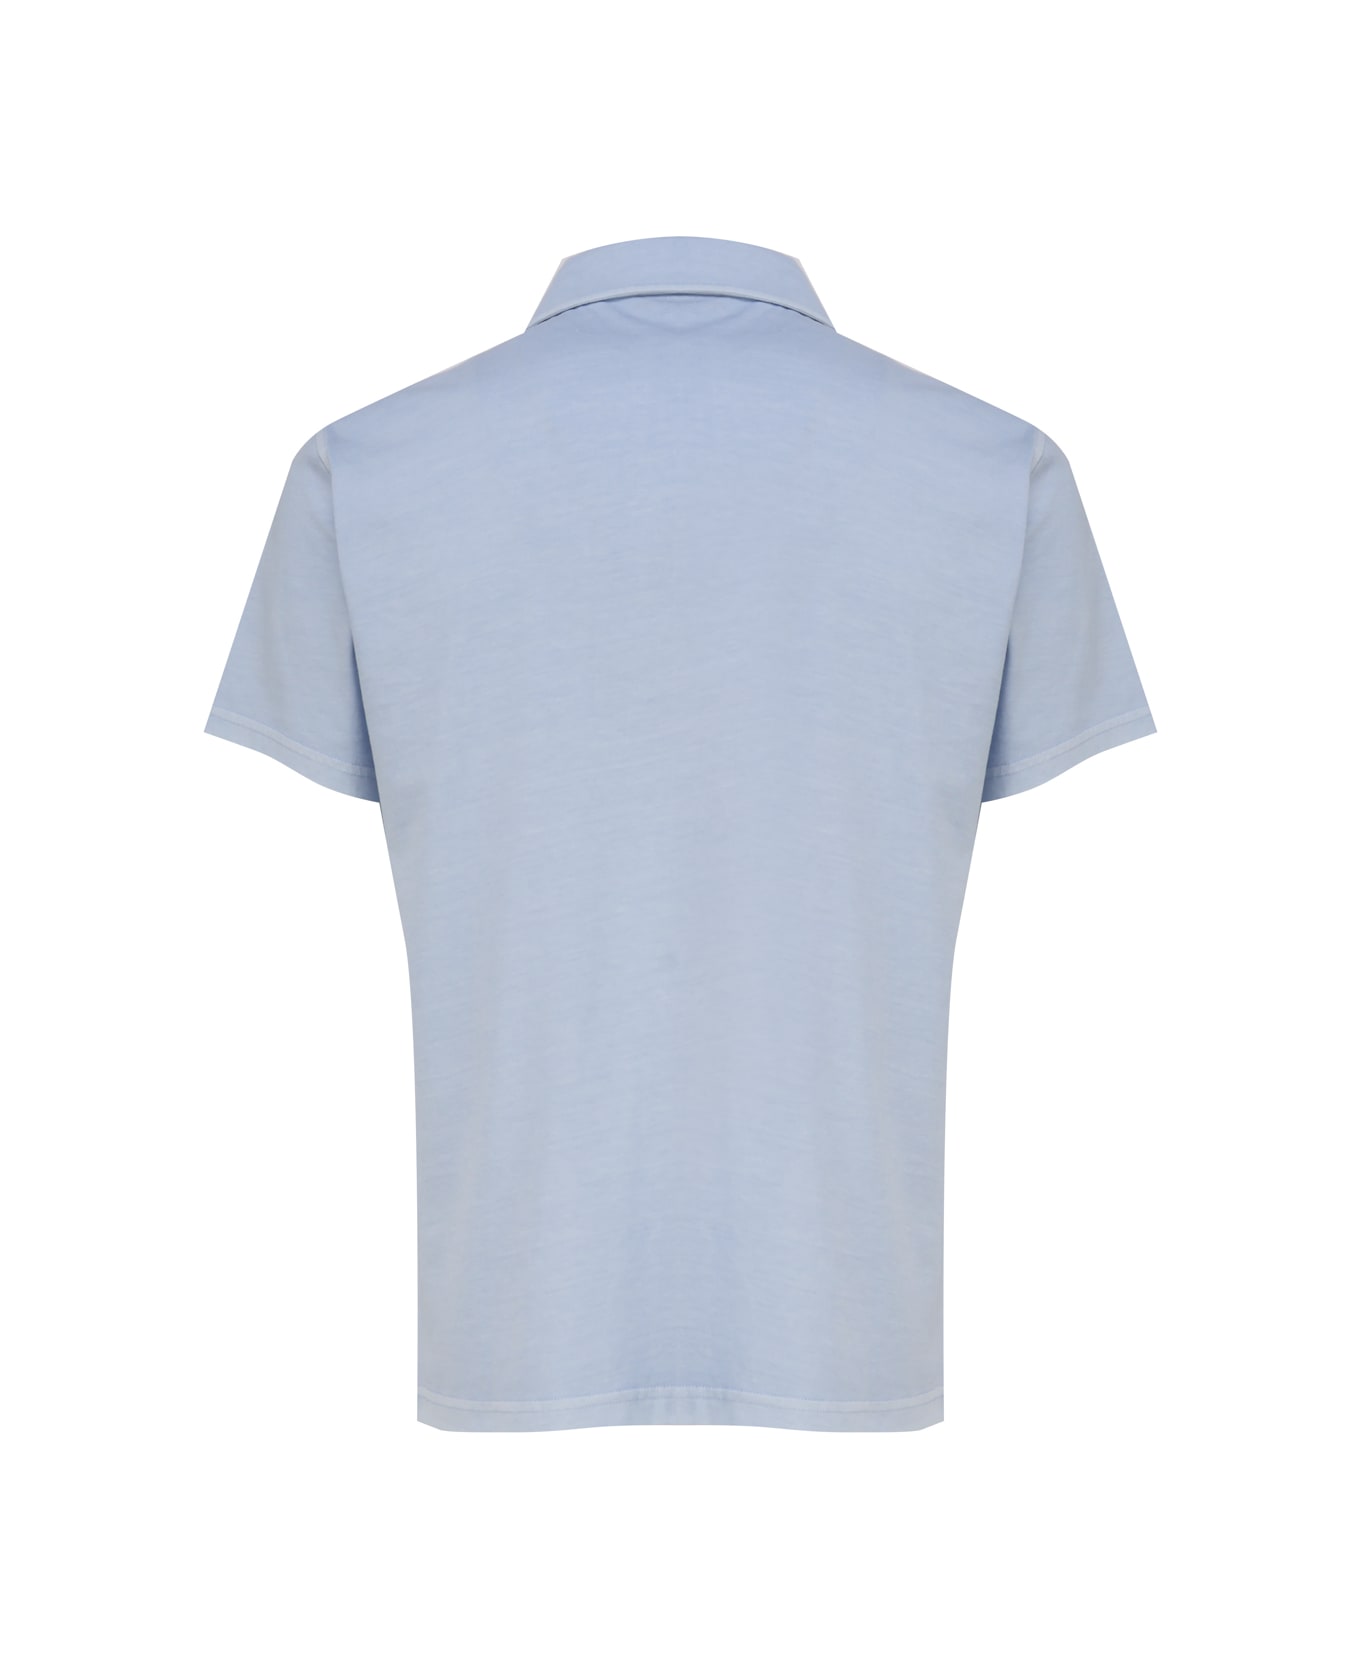 Fay Polo T-shirt In Cotton - Light blue ポロシャツ